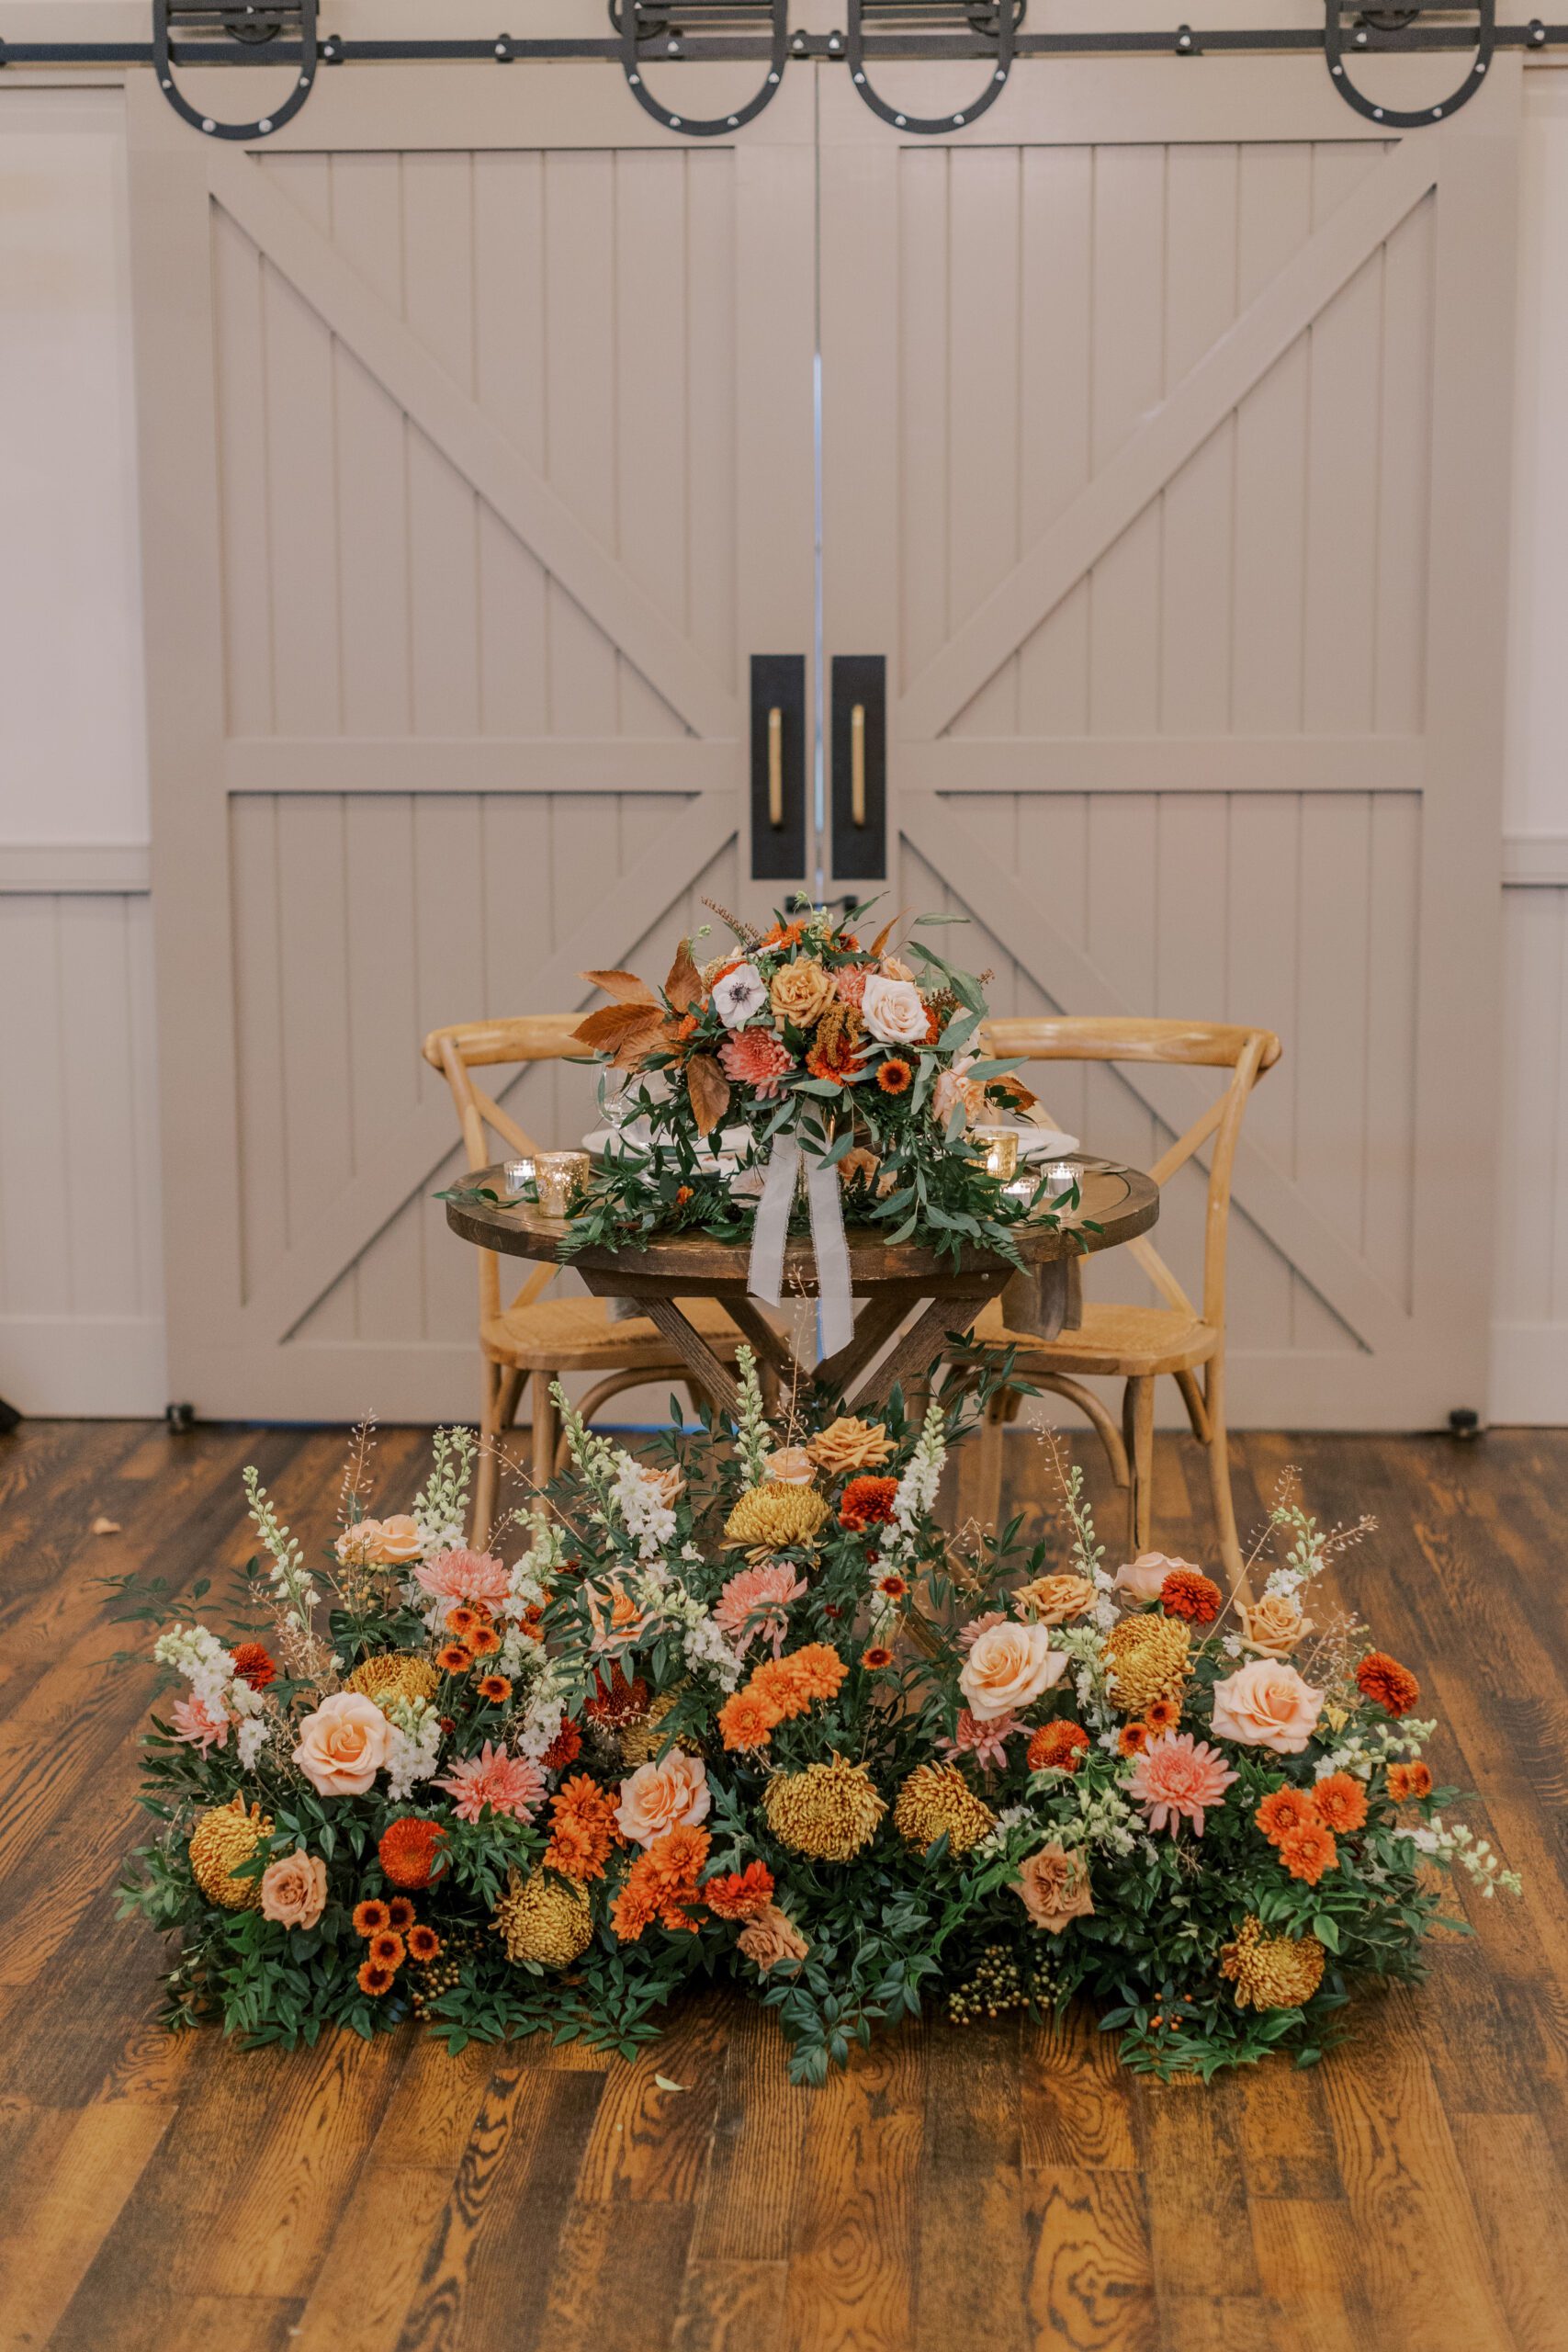 Bride and Groom's table at the reception covered in all kinds of orange, peach, and yellow flowers.